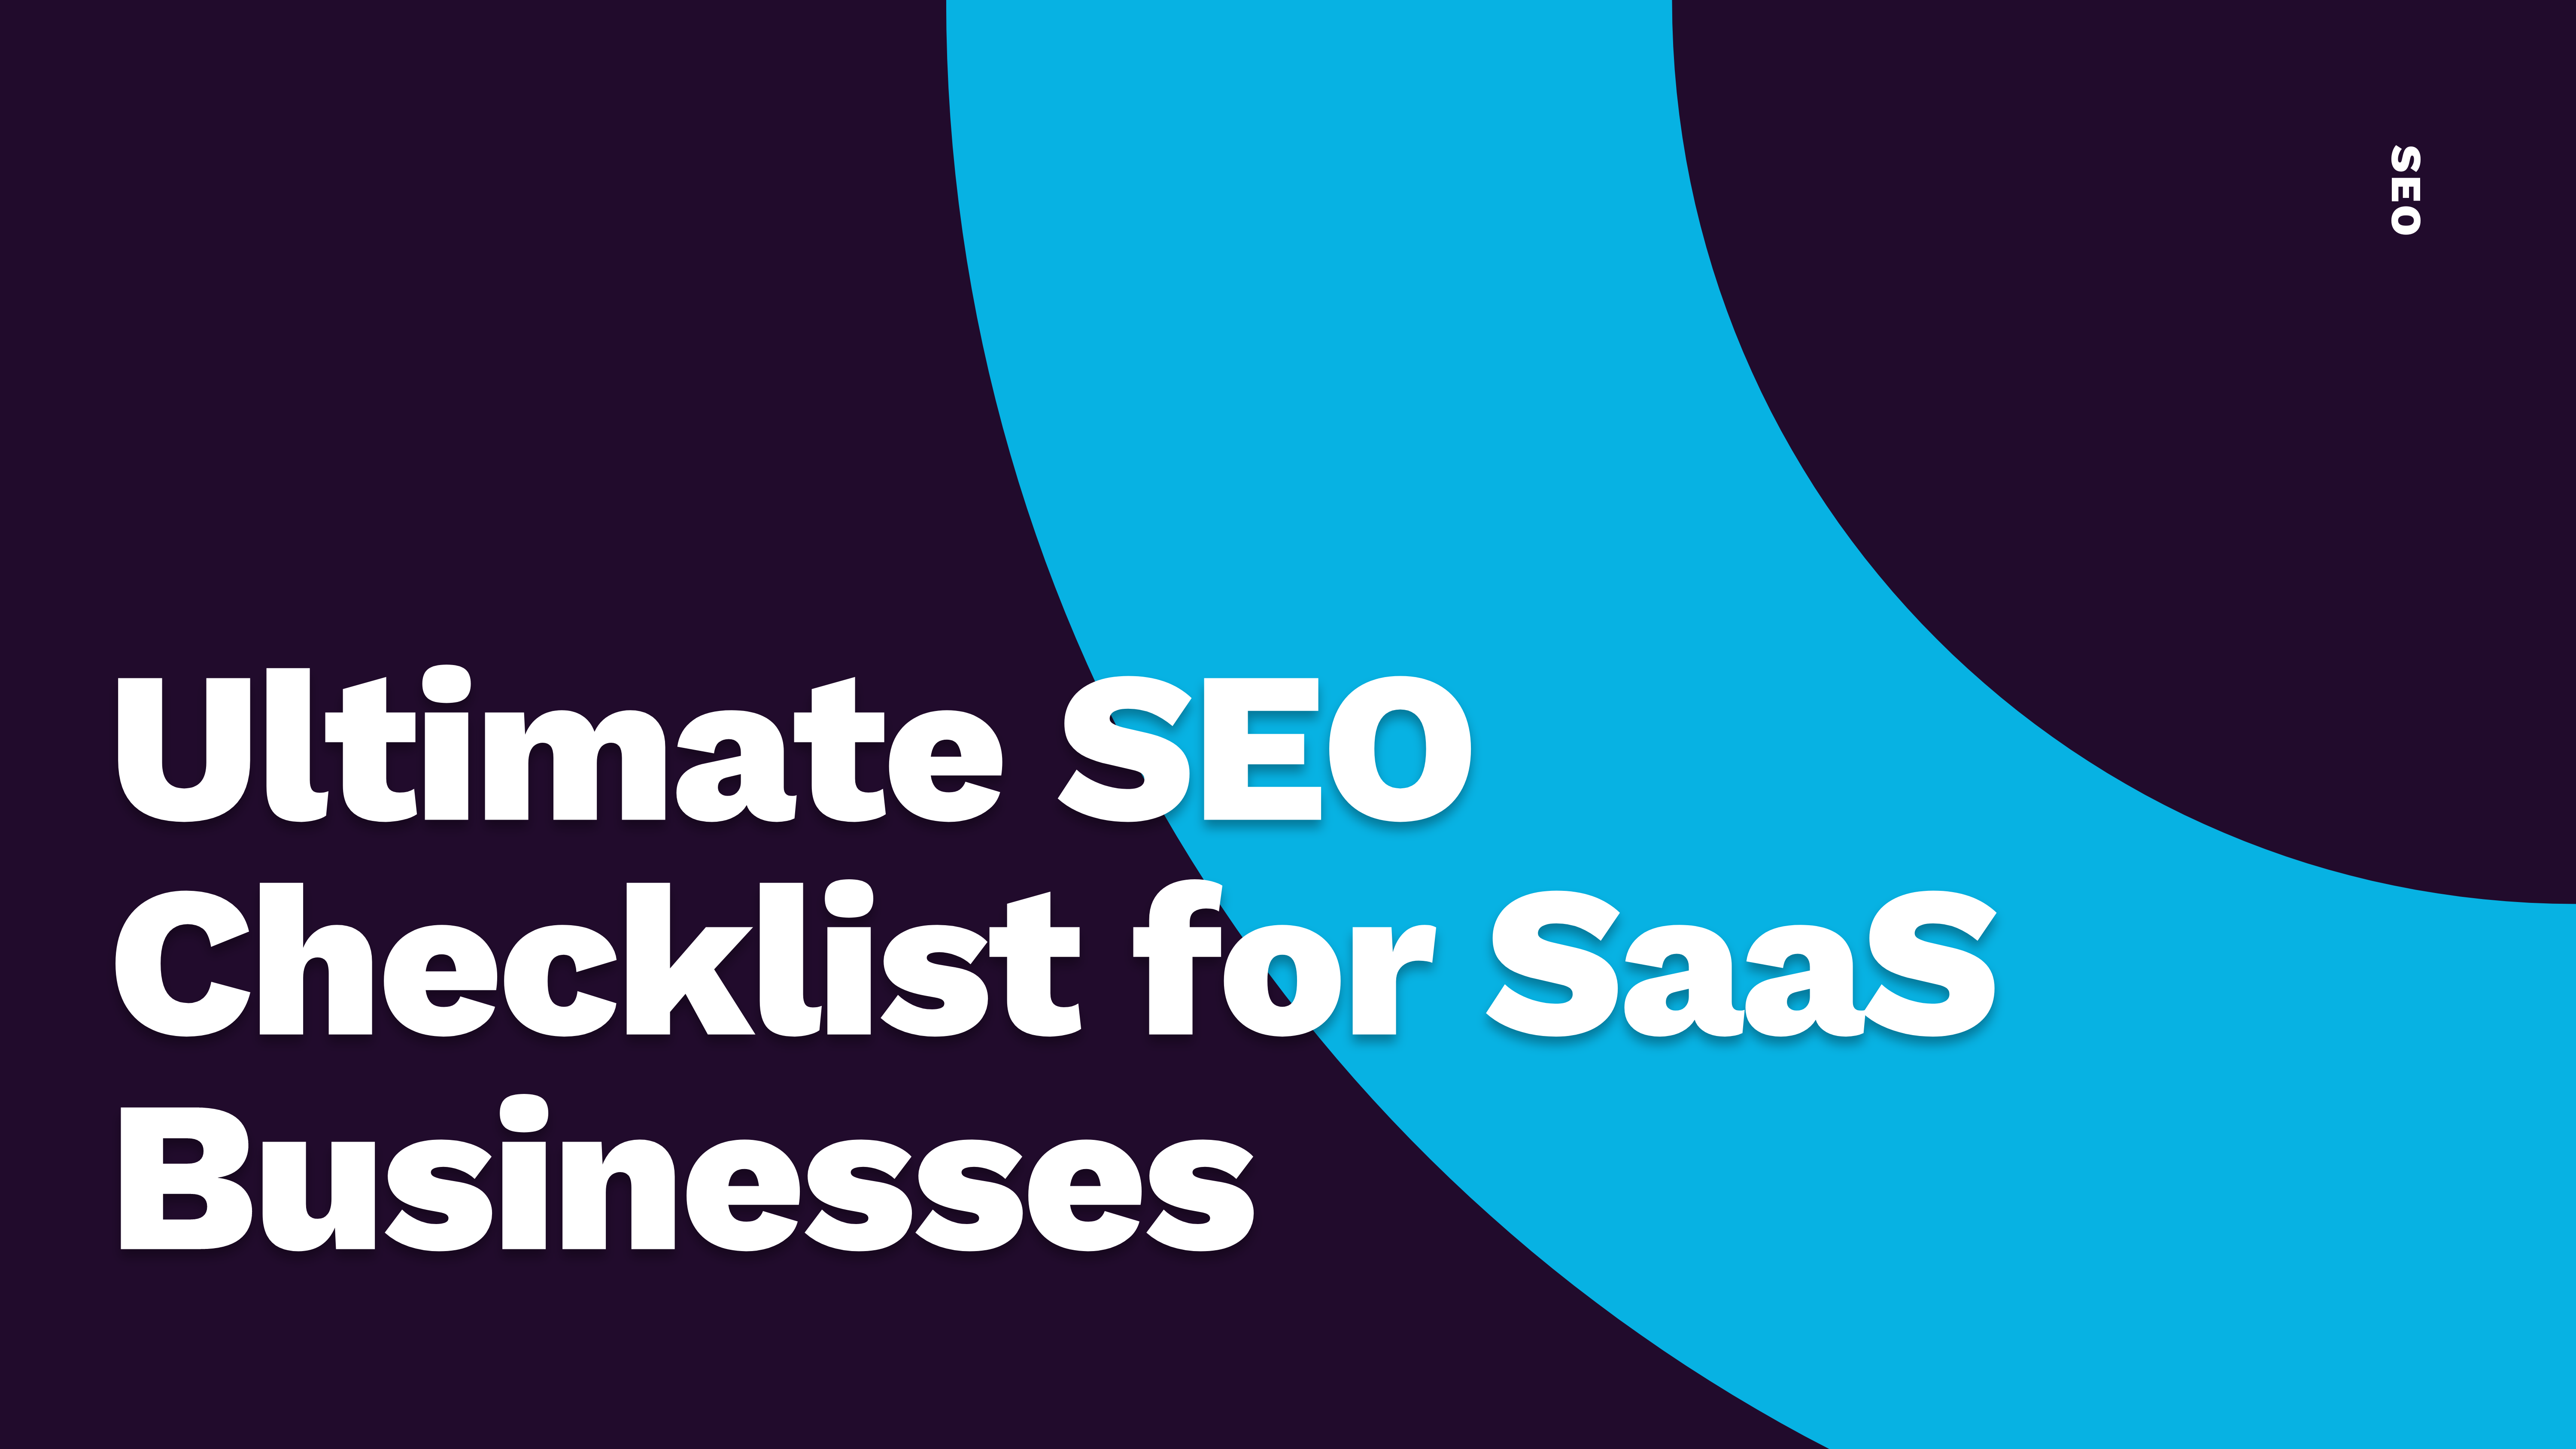 Ultimate SEO Checklist for SaaS Businesses